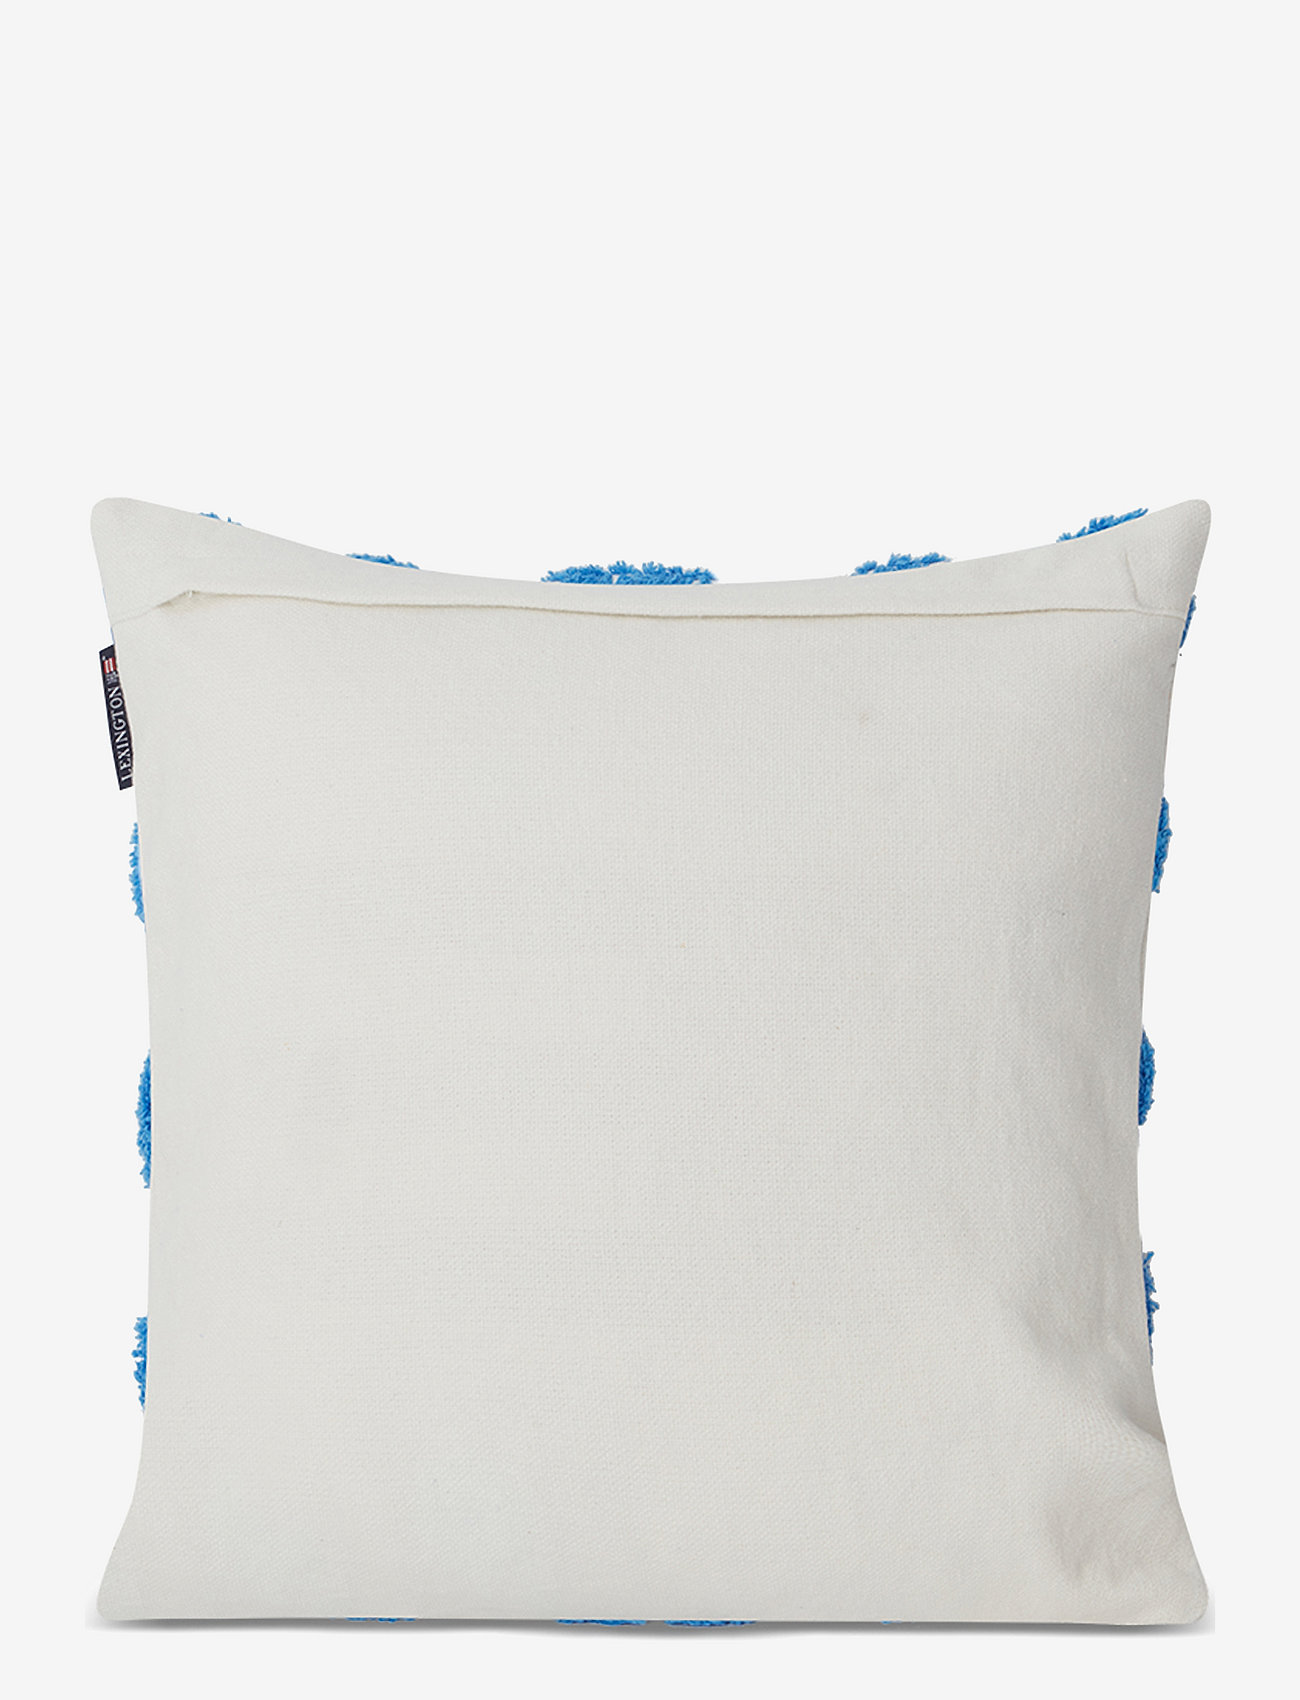 Lexington Home - Rug Graphic Recycled Cotton Canvas Pillow Cover - padjakatted - white/blue - 1